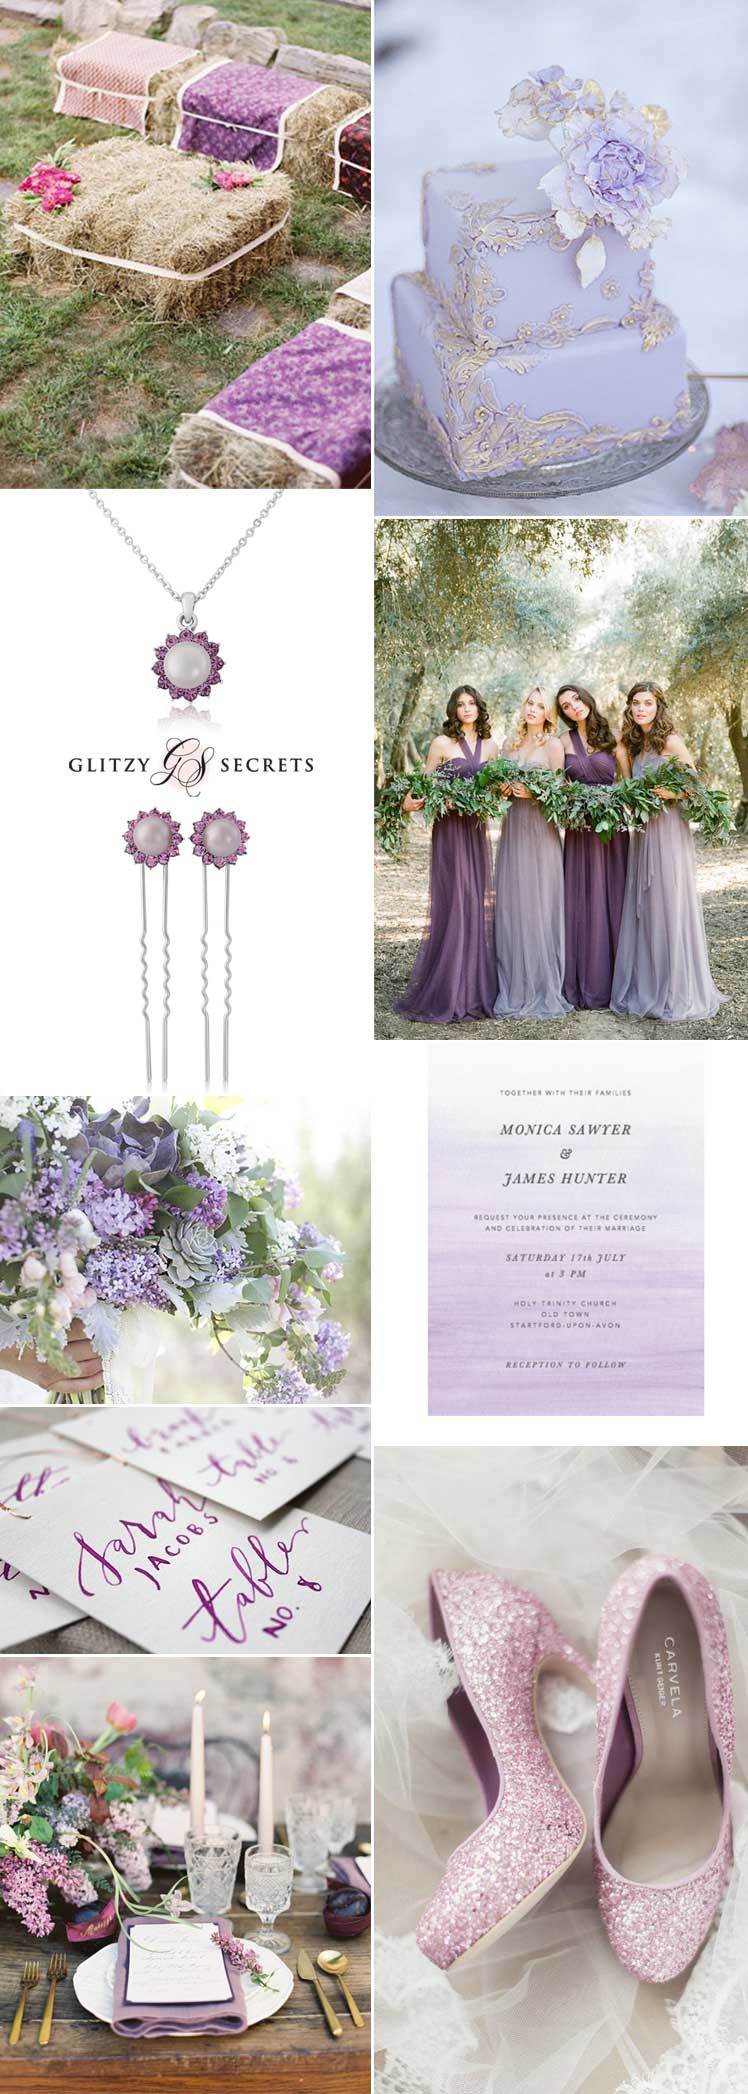 Lilac inspiration for your wedding day theme